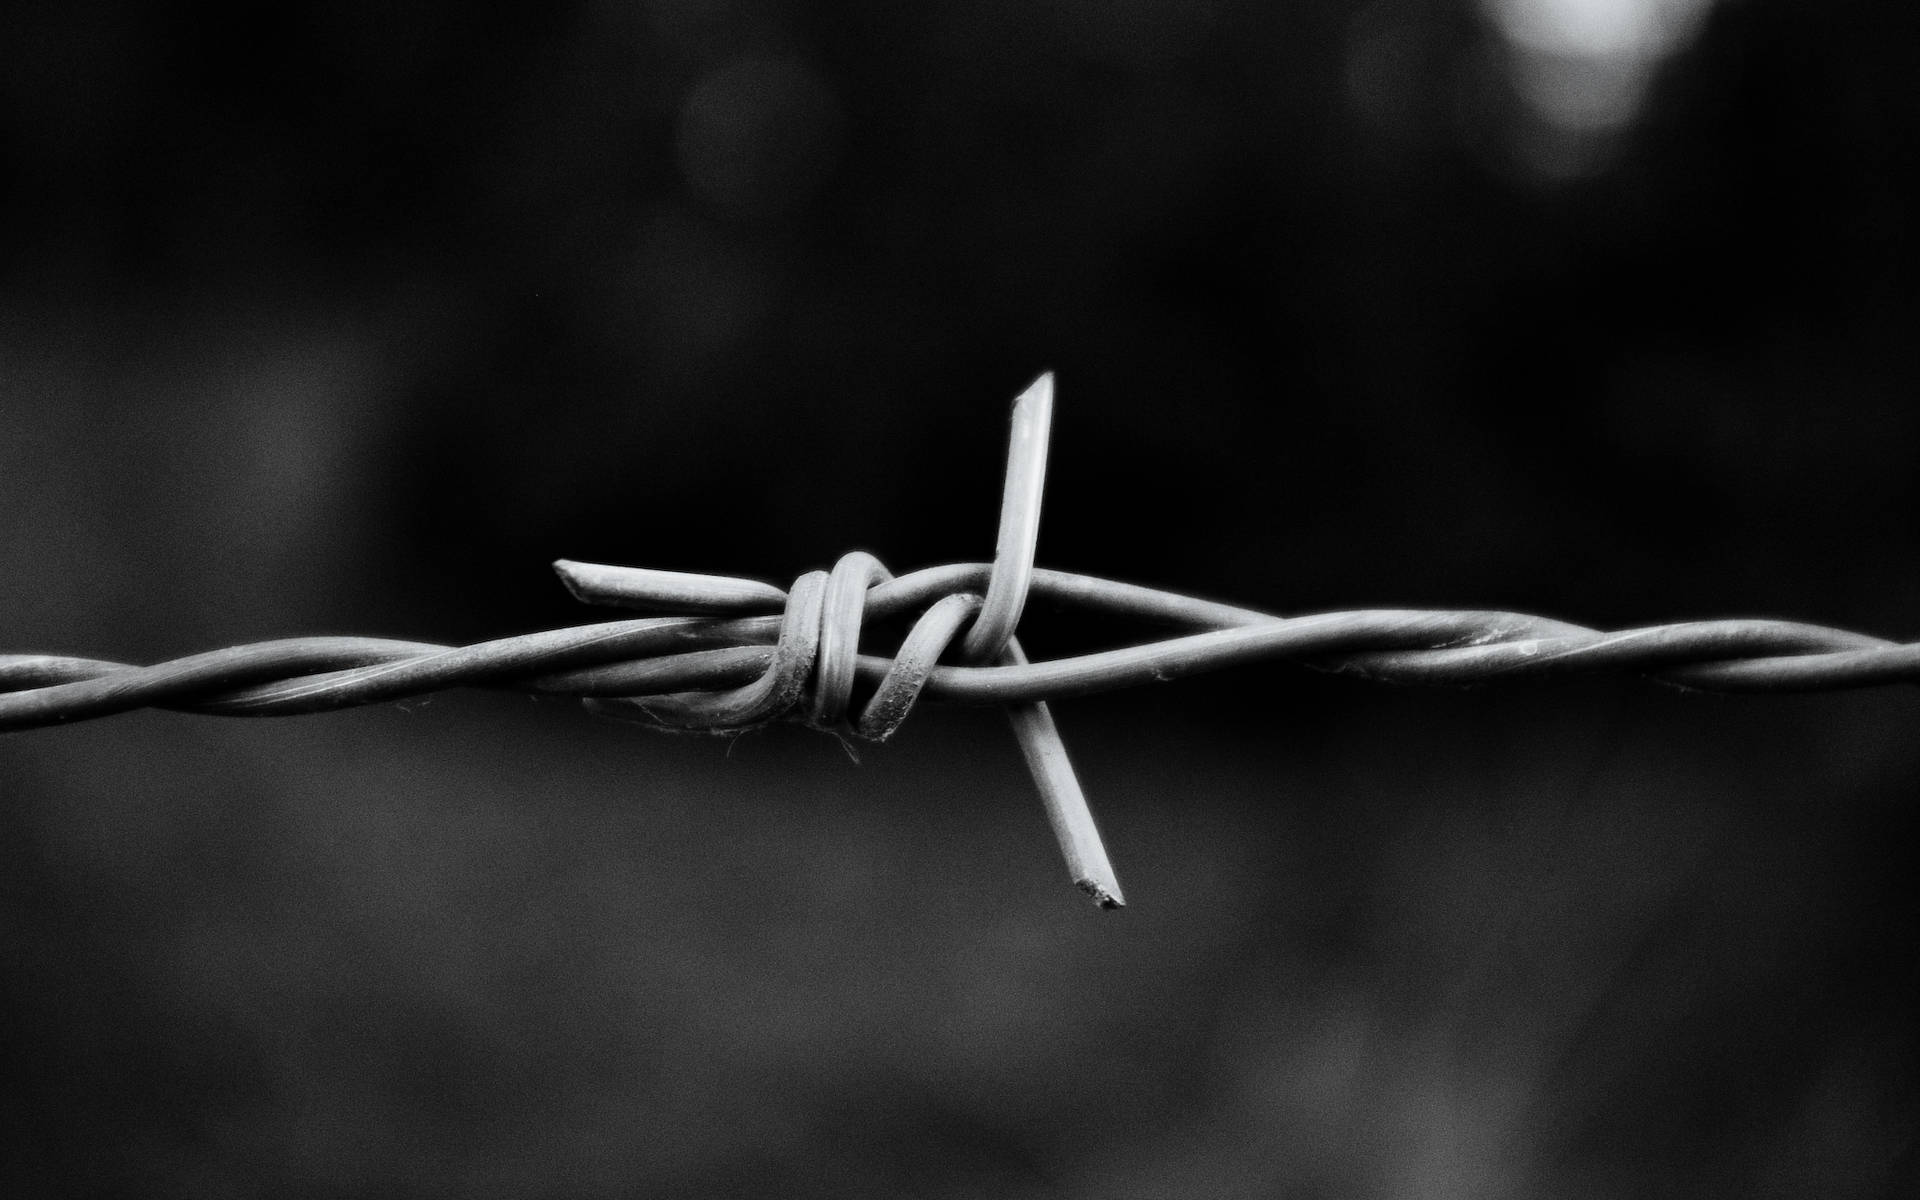 Black And White Hd Barbed Wire Wallpaper